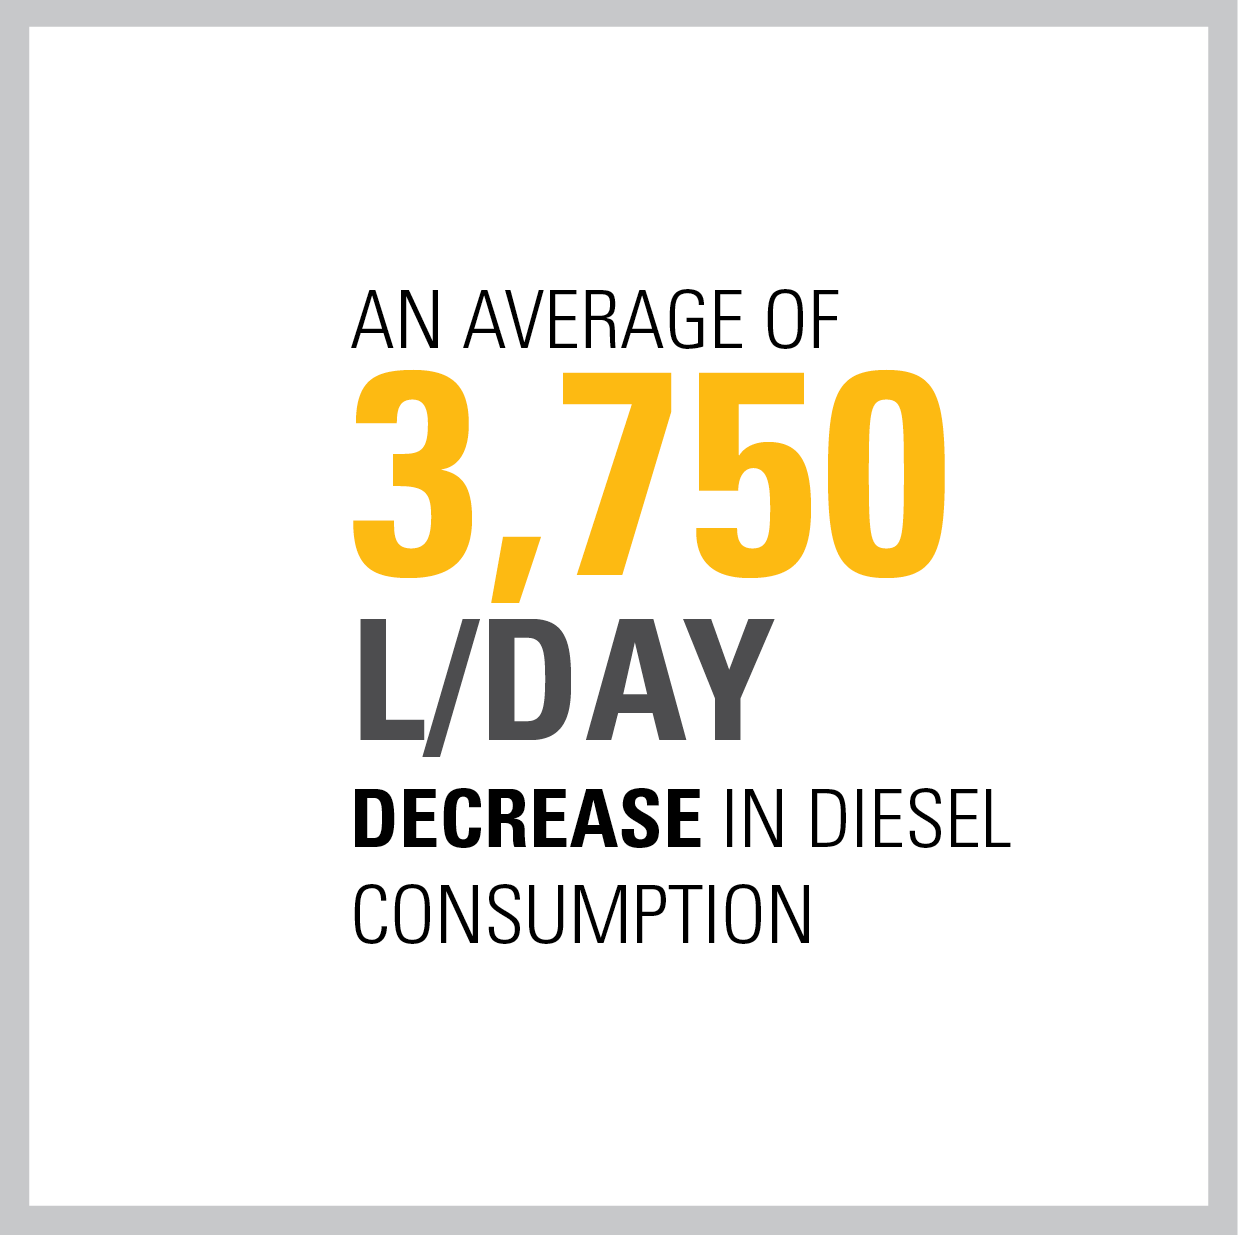 An average of 3,750 liters per day decrease in diesel consumption